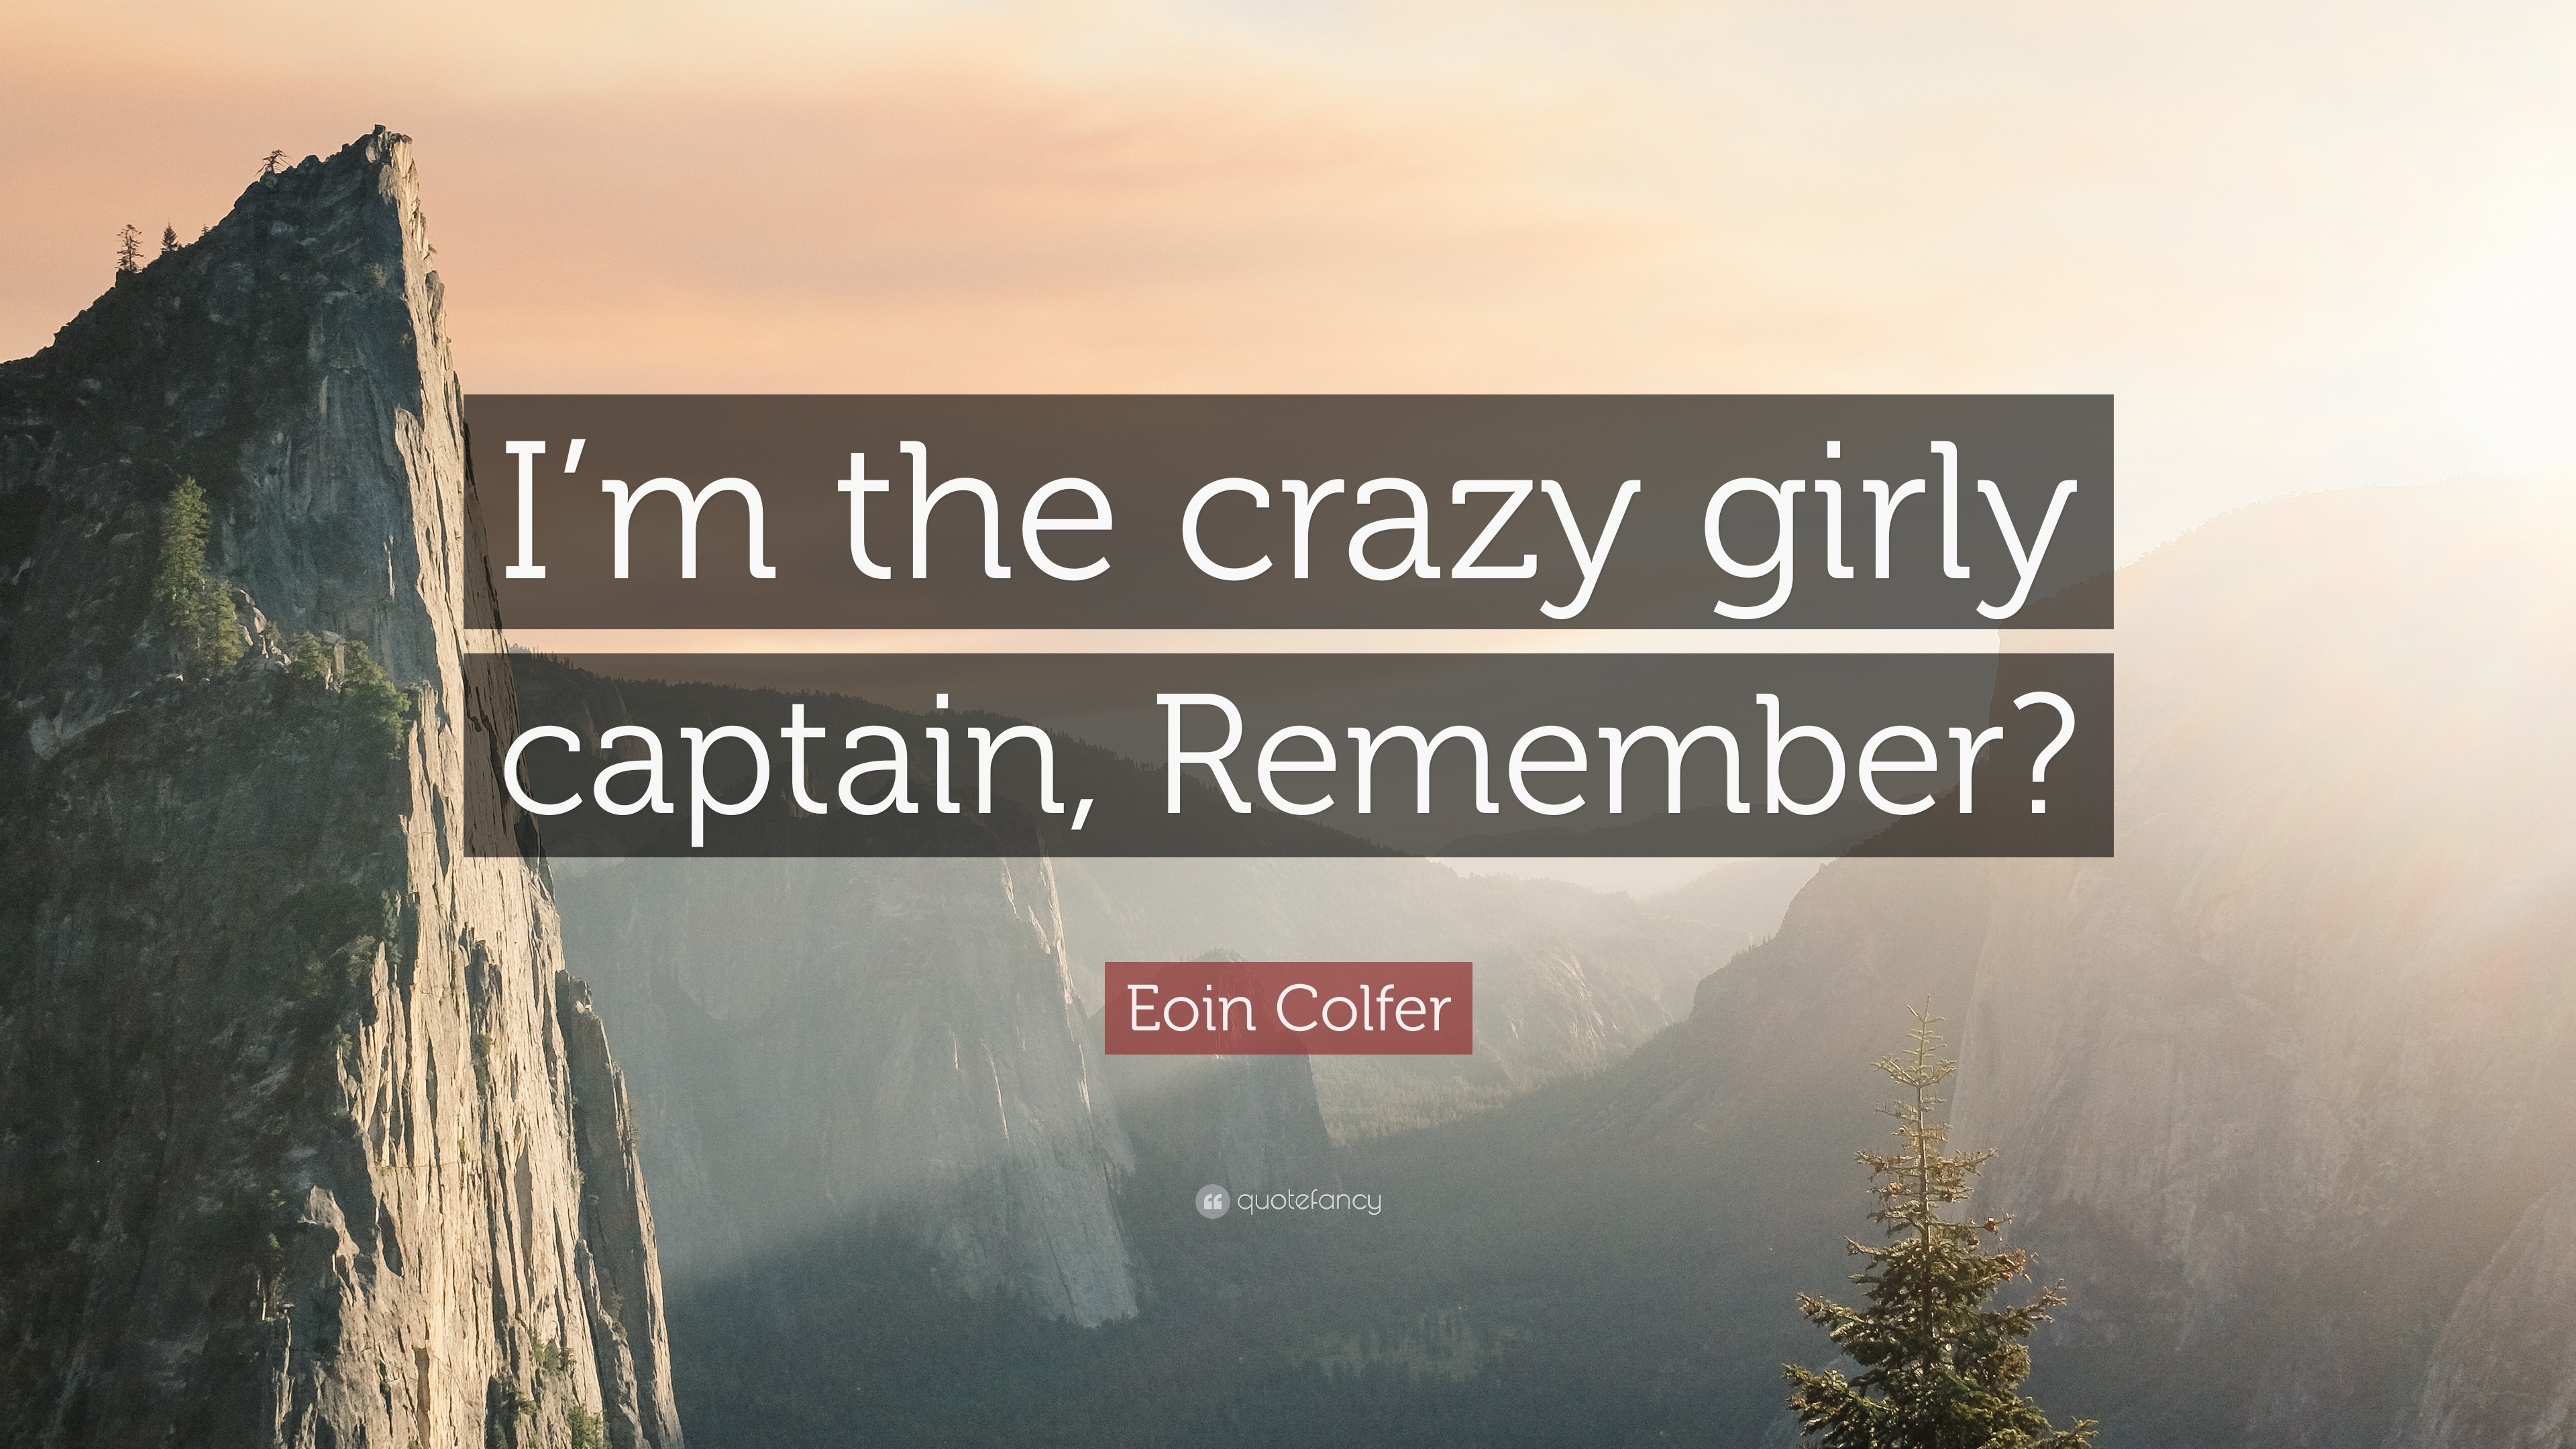 Eoin Colfer Quote: "I'm the crazy girly captain, Remember ...